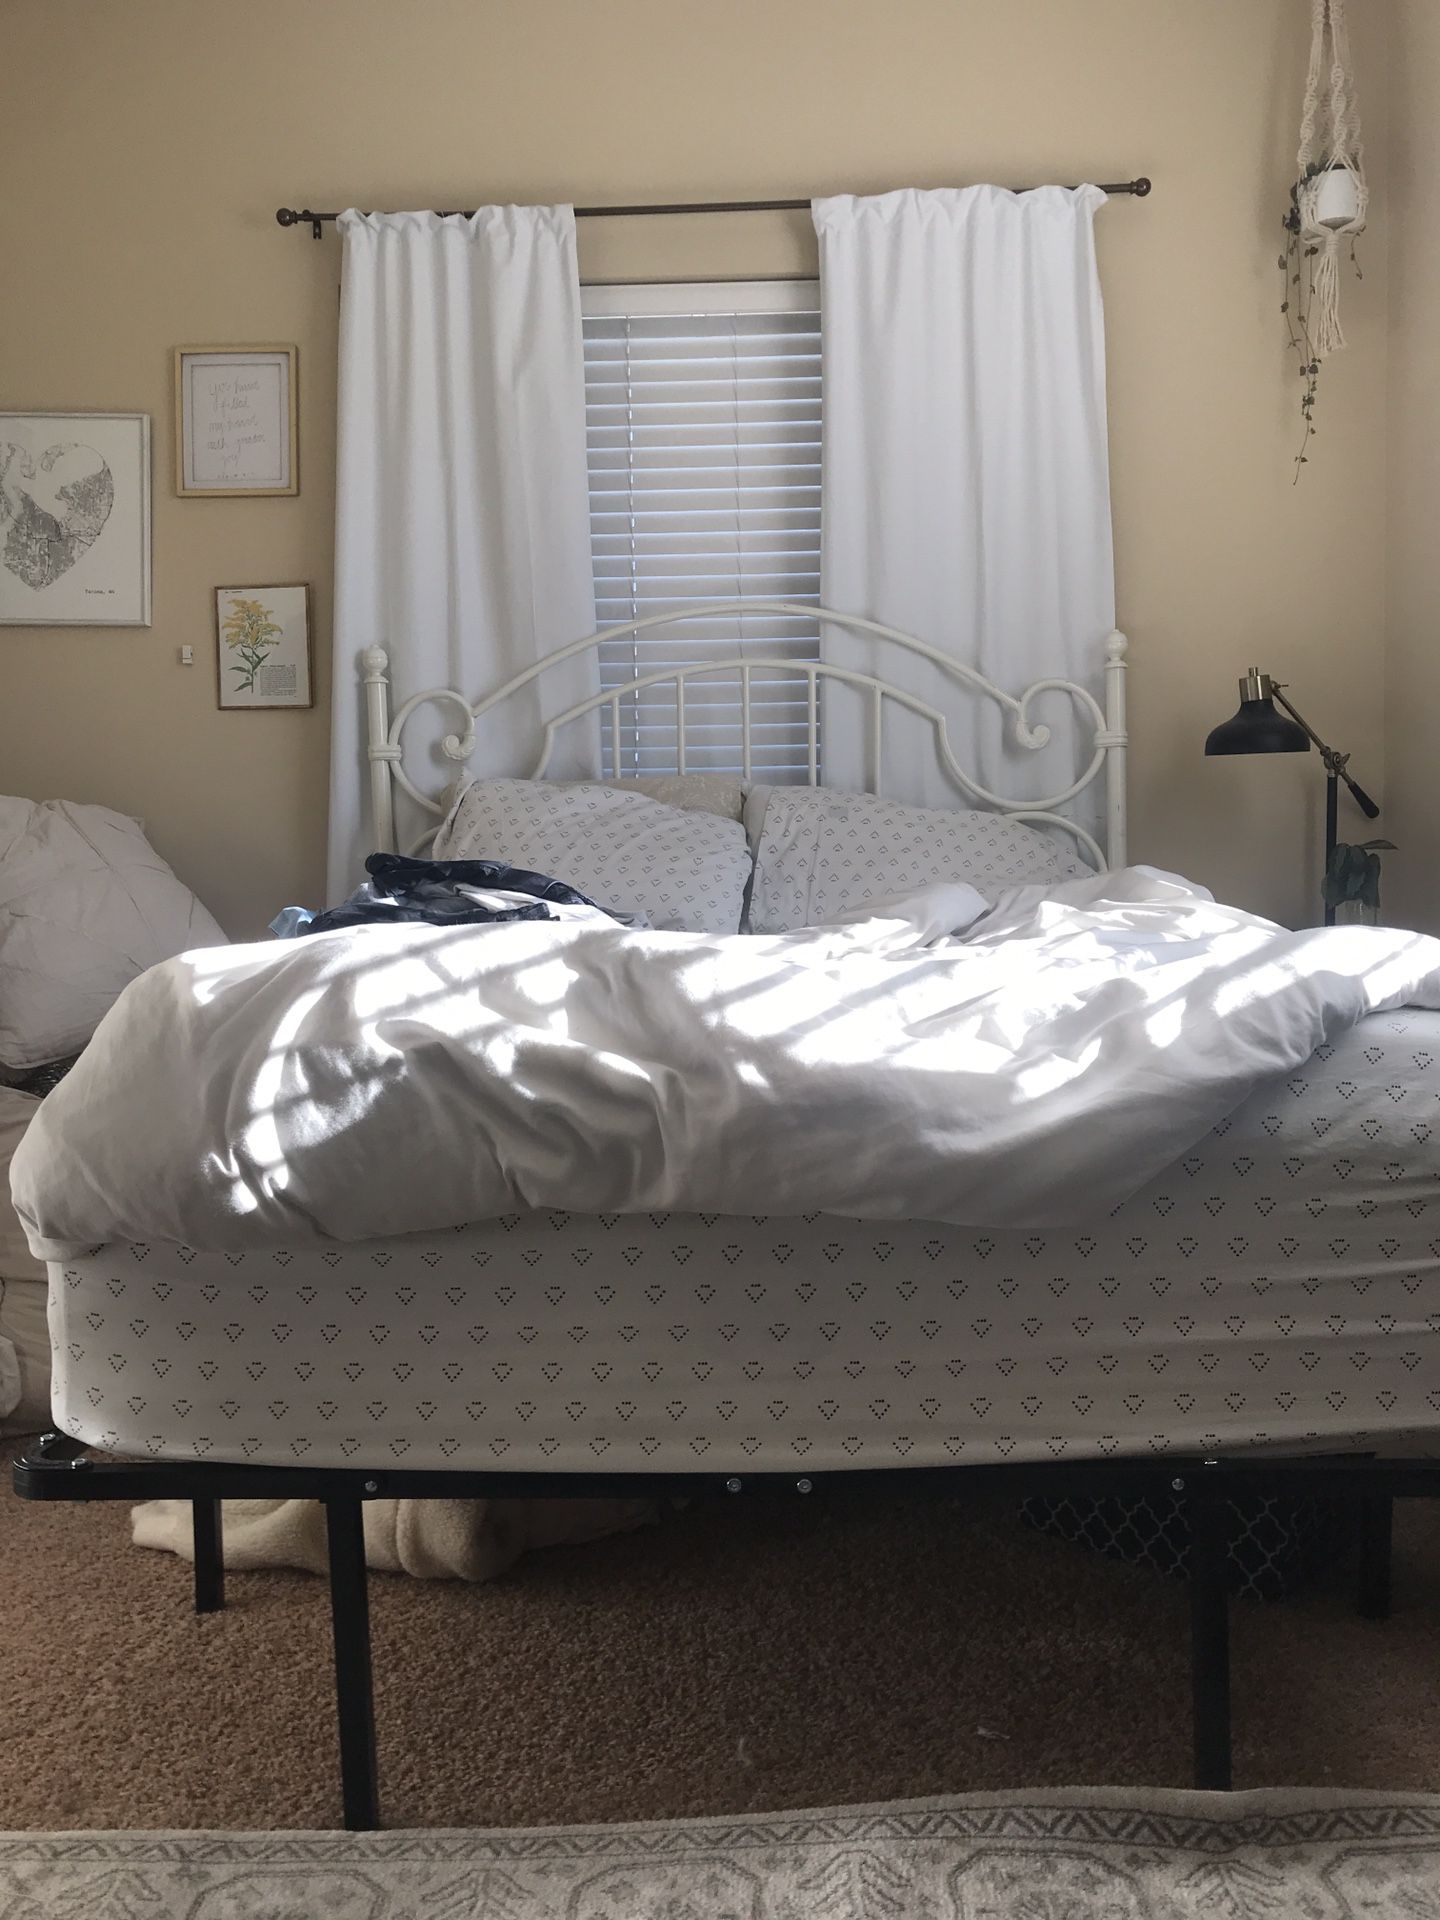 METAL BED FRAME/(head board not included)full size bed